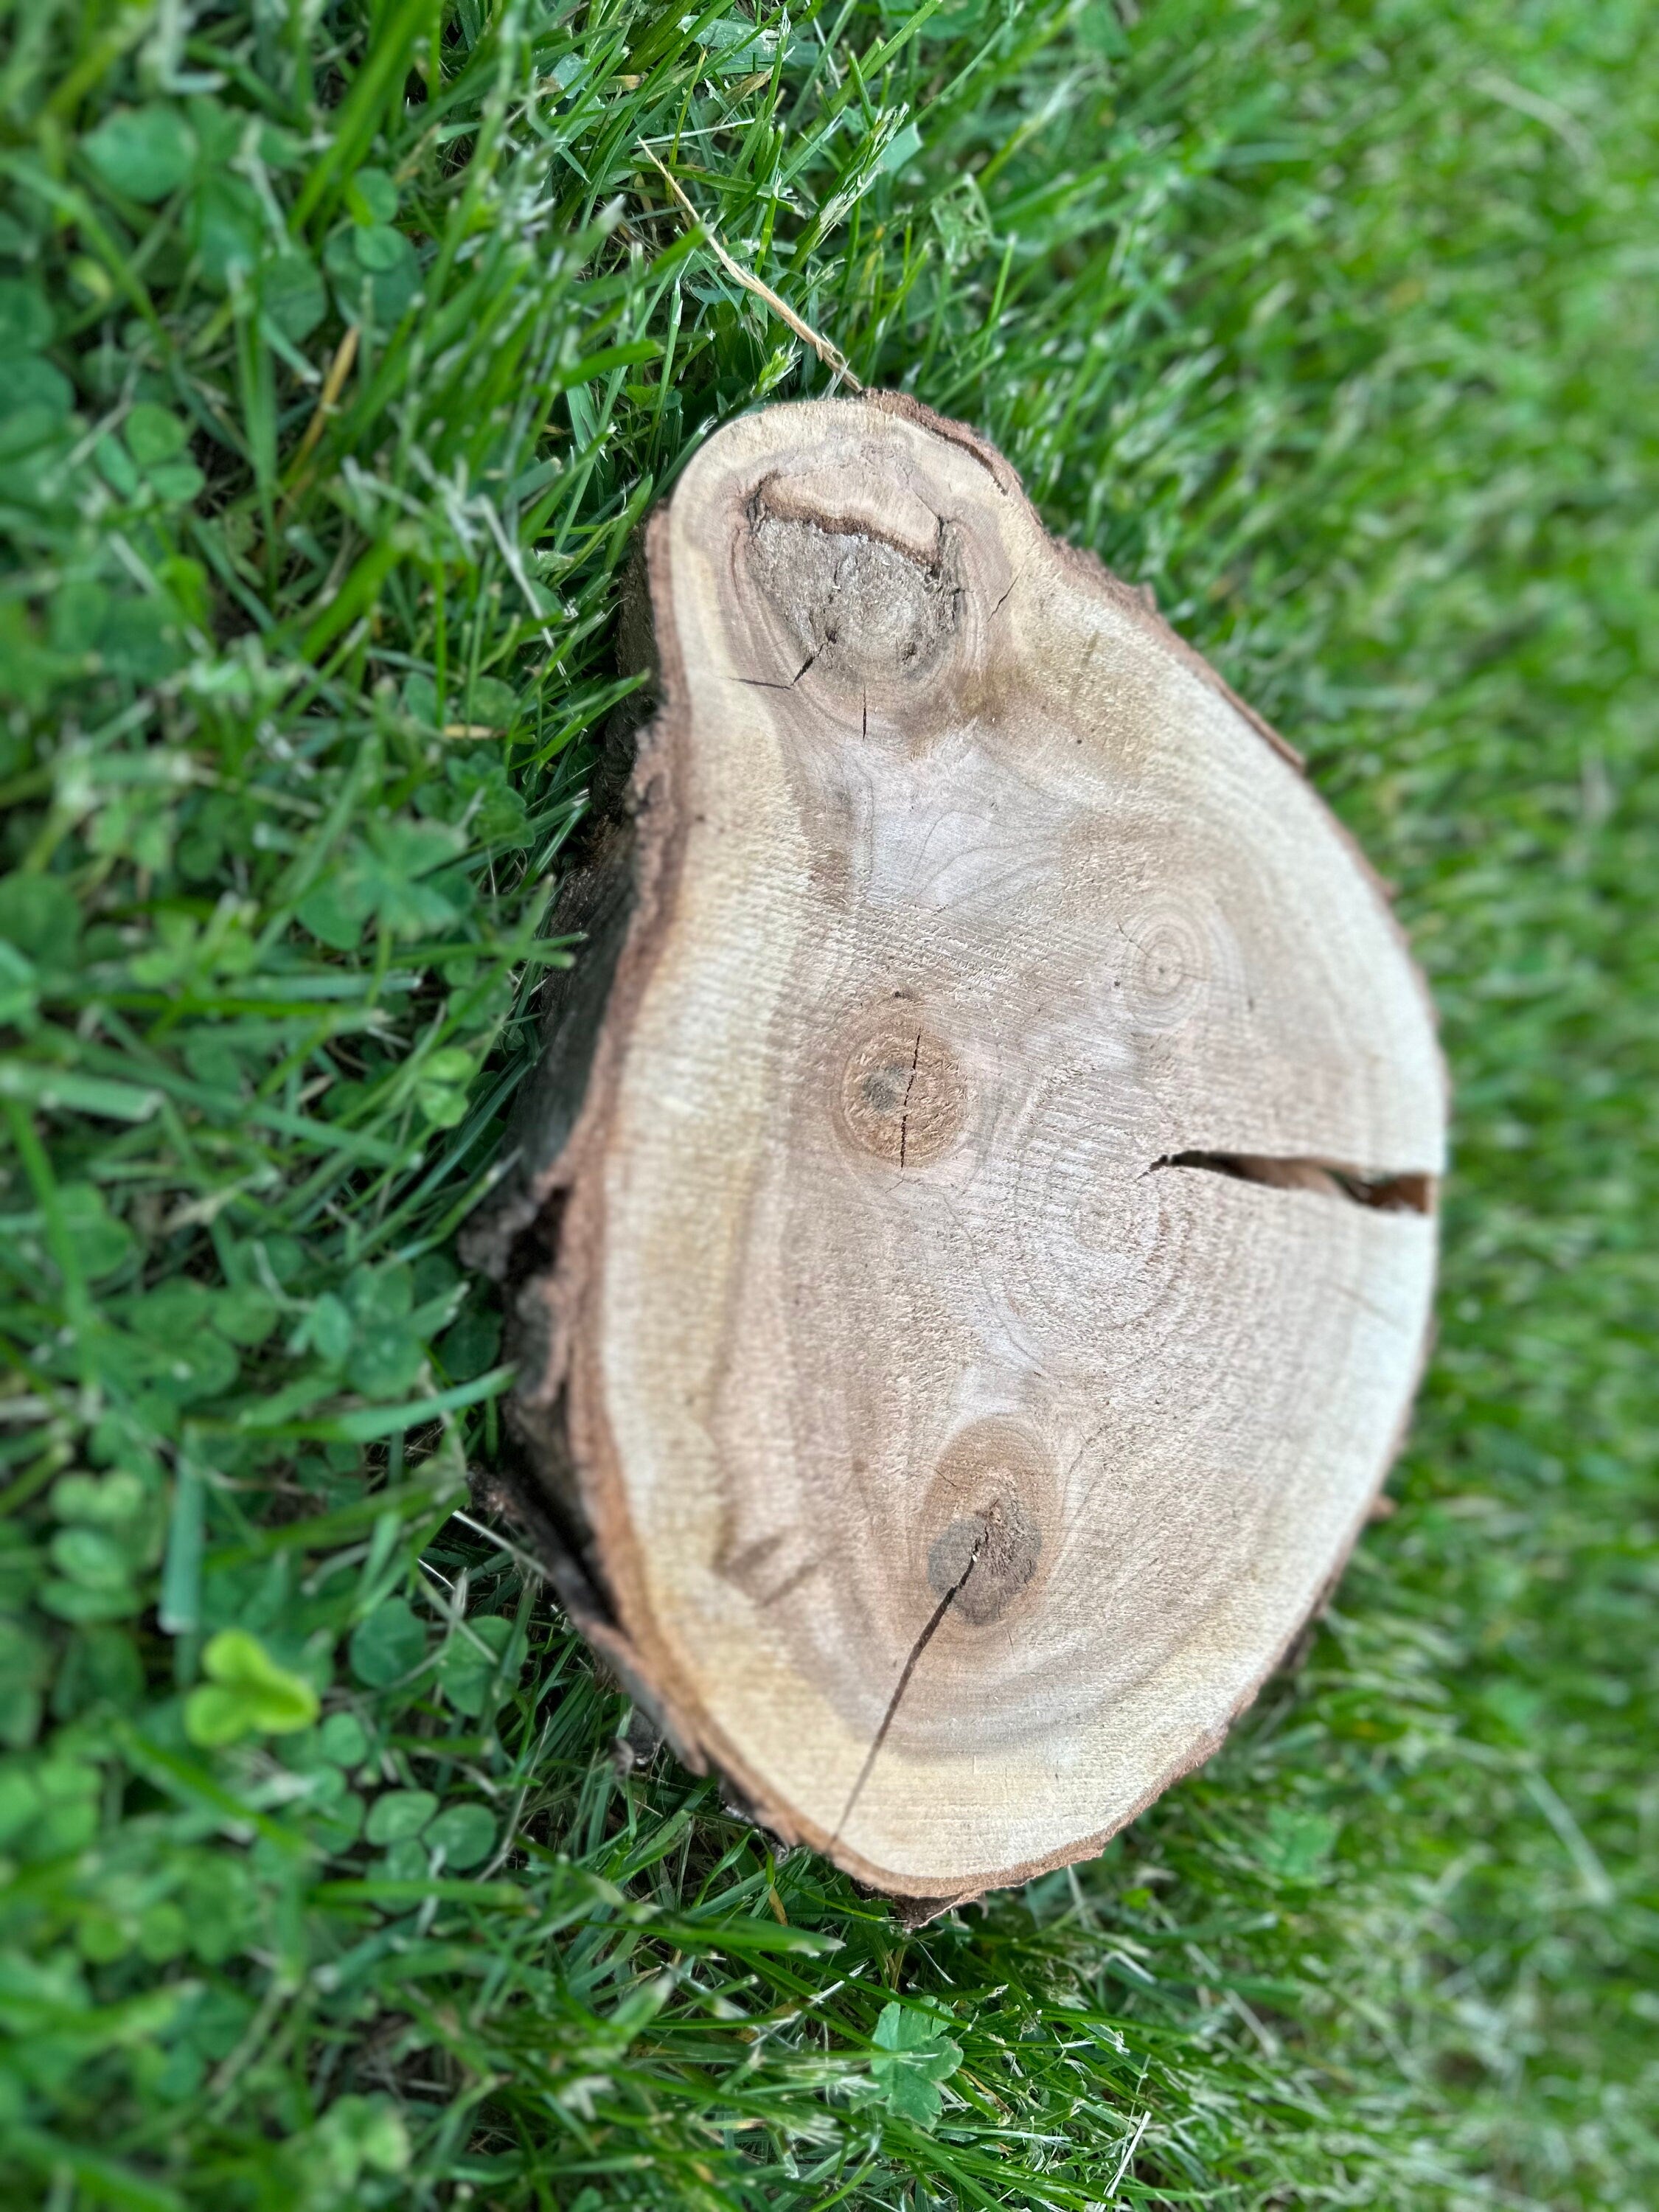 Cherry Wood Slice, One Count, Approximately 8.5 Inches Long by 6.5 Inches Wide and 1 Inch Thick